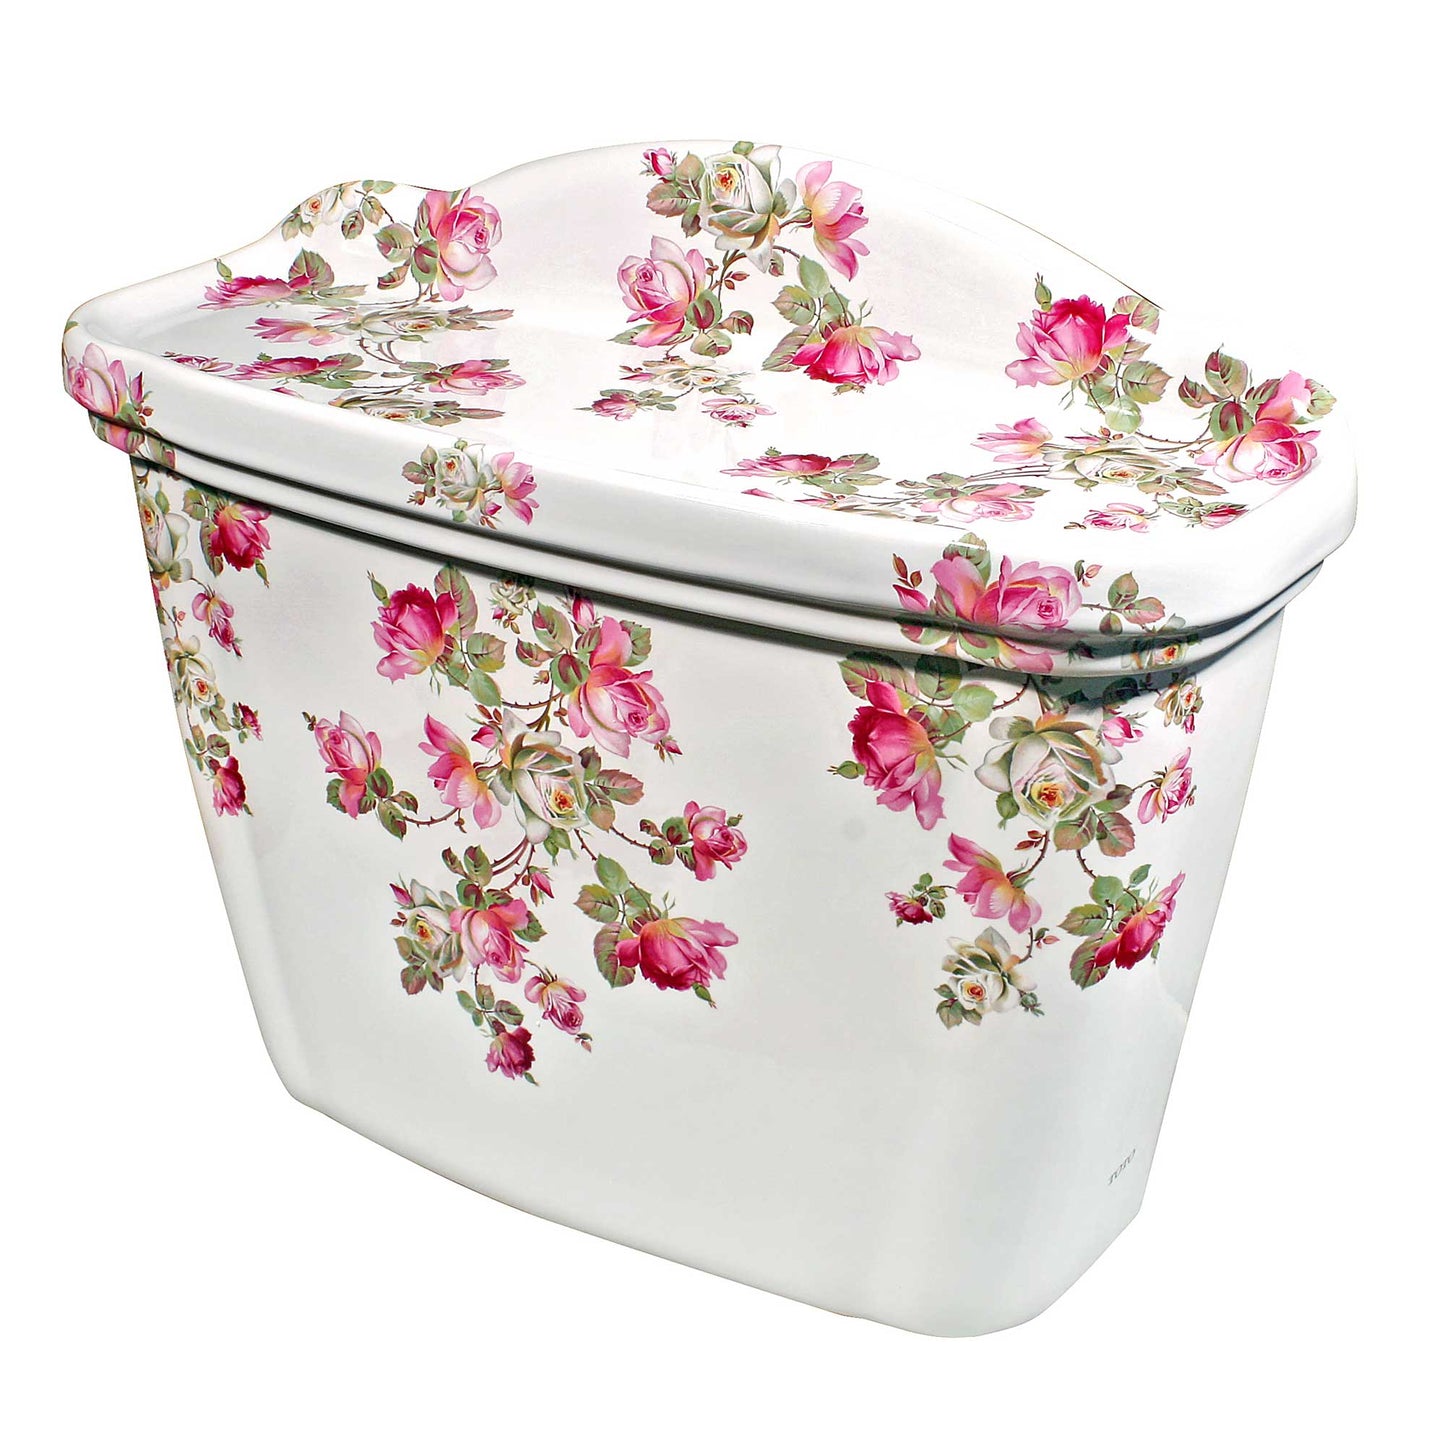 toto toilet painted with pink and white roses